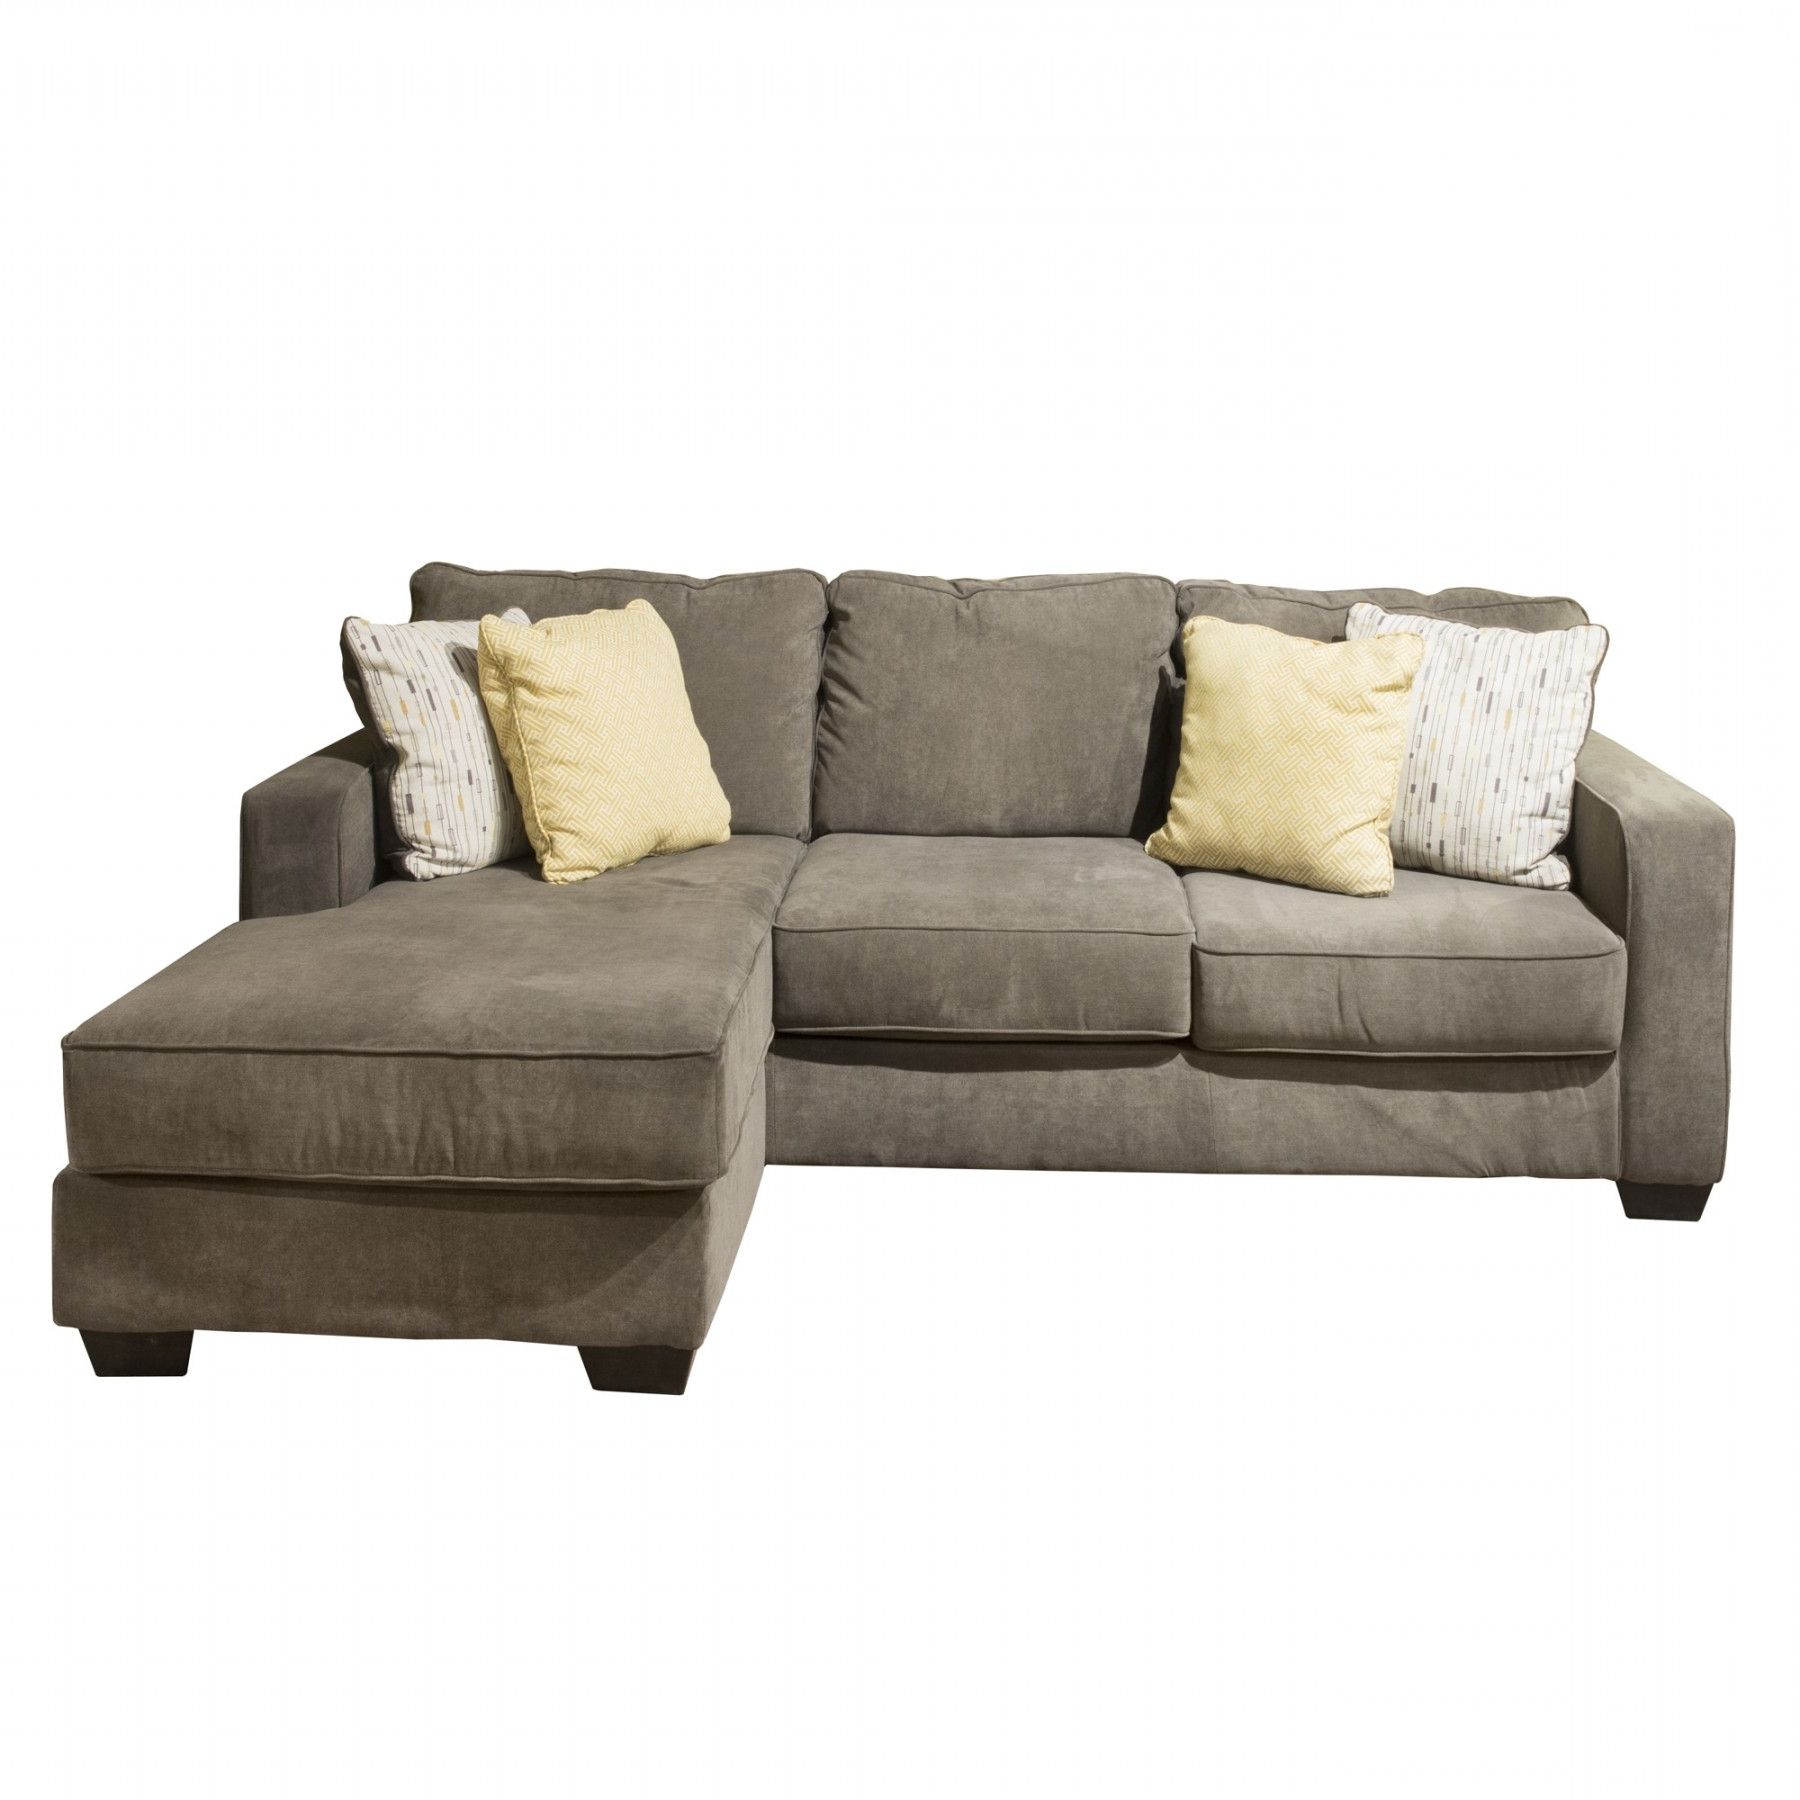 Well Liked Hodan Sofa Chaise – Bernie & Phyl's Furniture  Ashley Furniture Inside Hodan Sofas With Chaise (View 7 of 15)